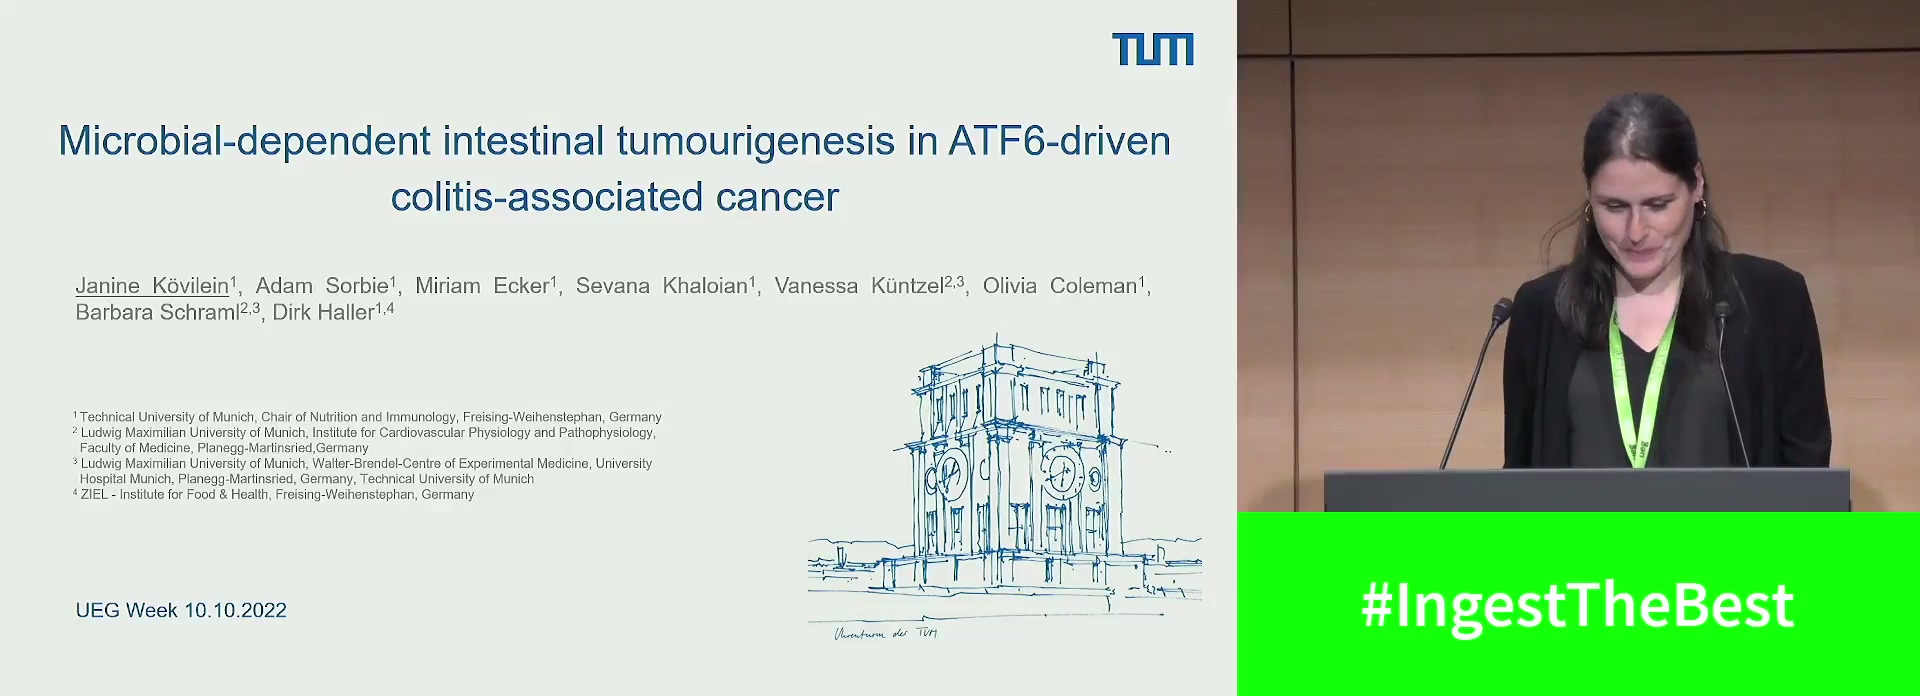 MICROBIAL-DEPENDENT INTESTINAL TUMOURIGENESIS IN ATF6-DRIVEN COLITIS-ASSOCIATED-CANCER